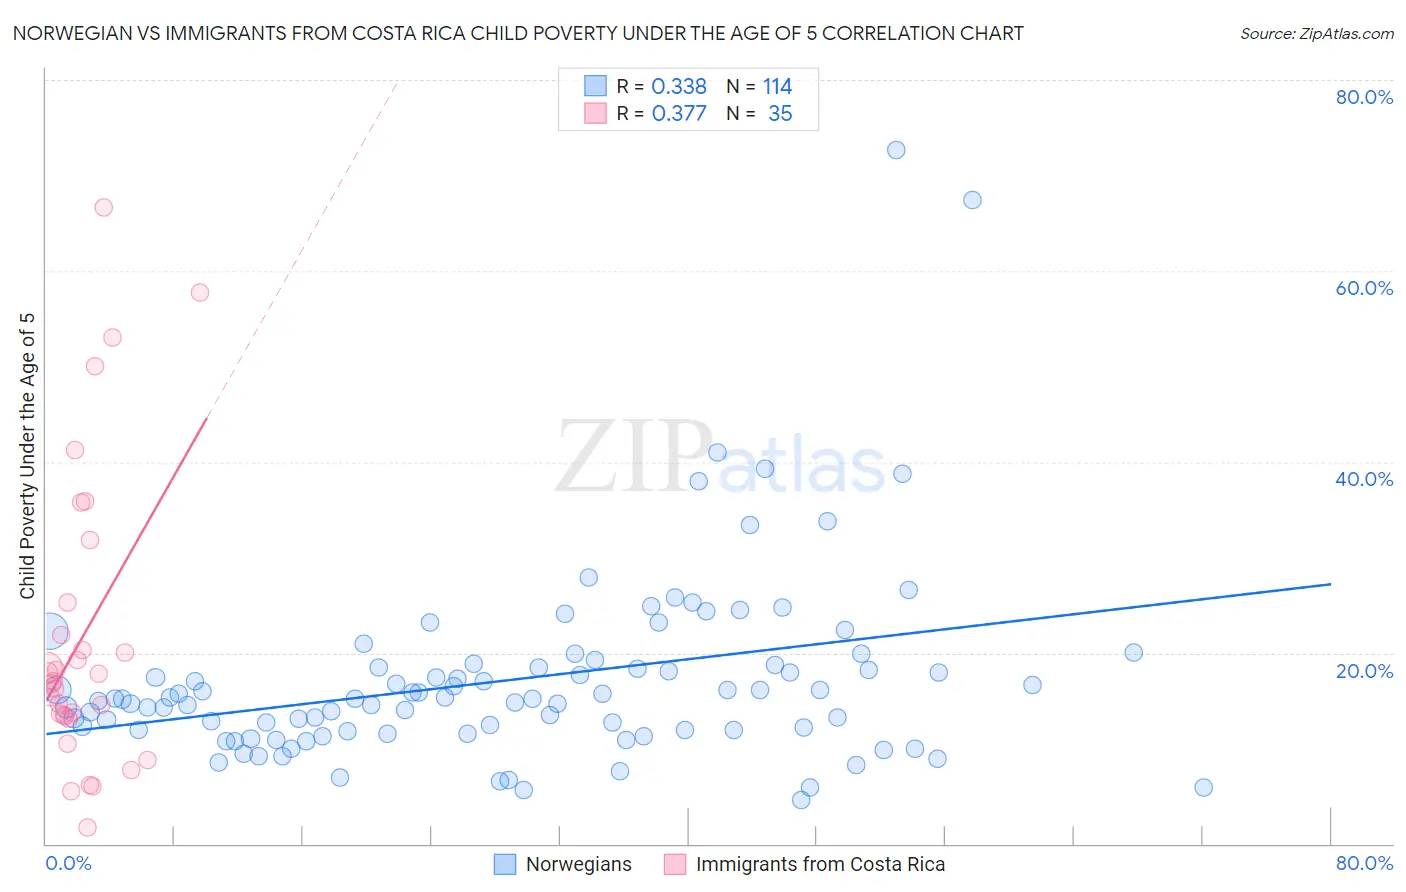 Norwegian vs Immigrants from Costa Rica Child Poverty Under the Age of 5